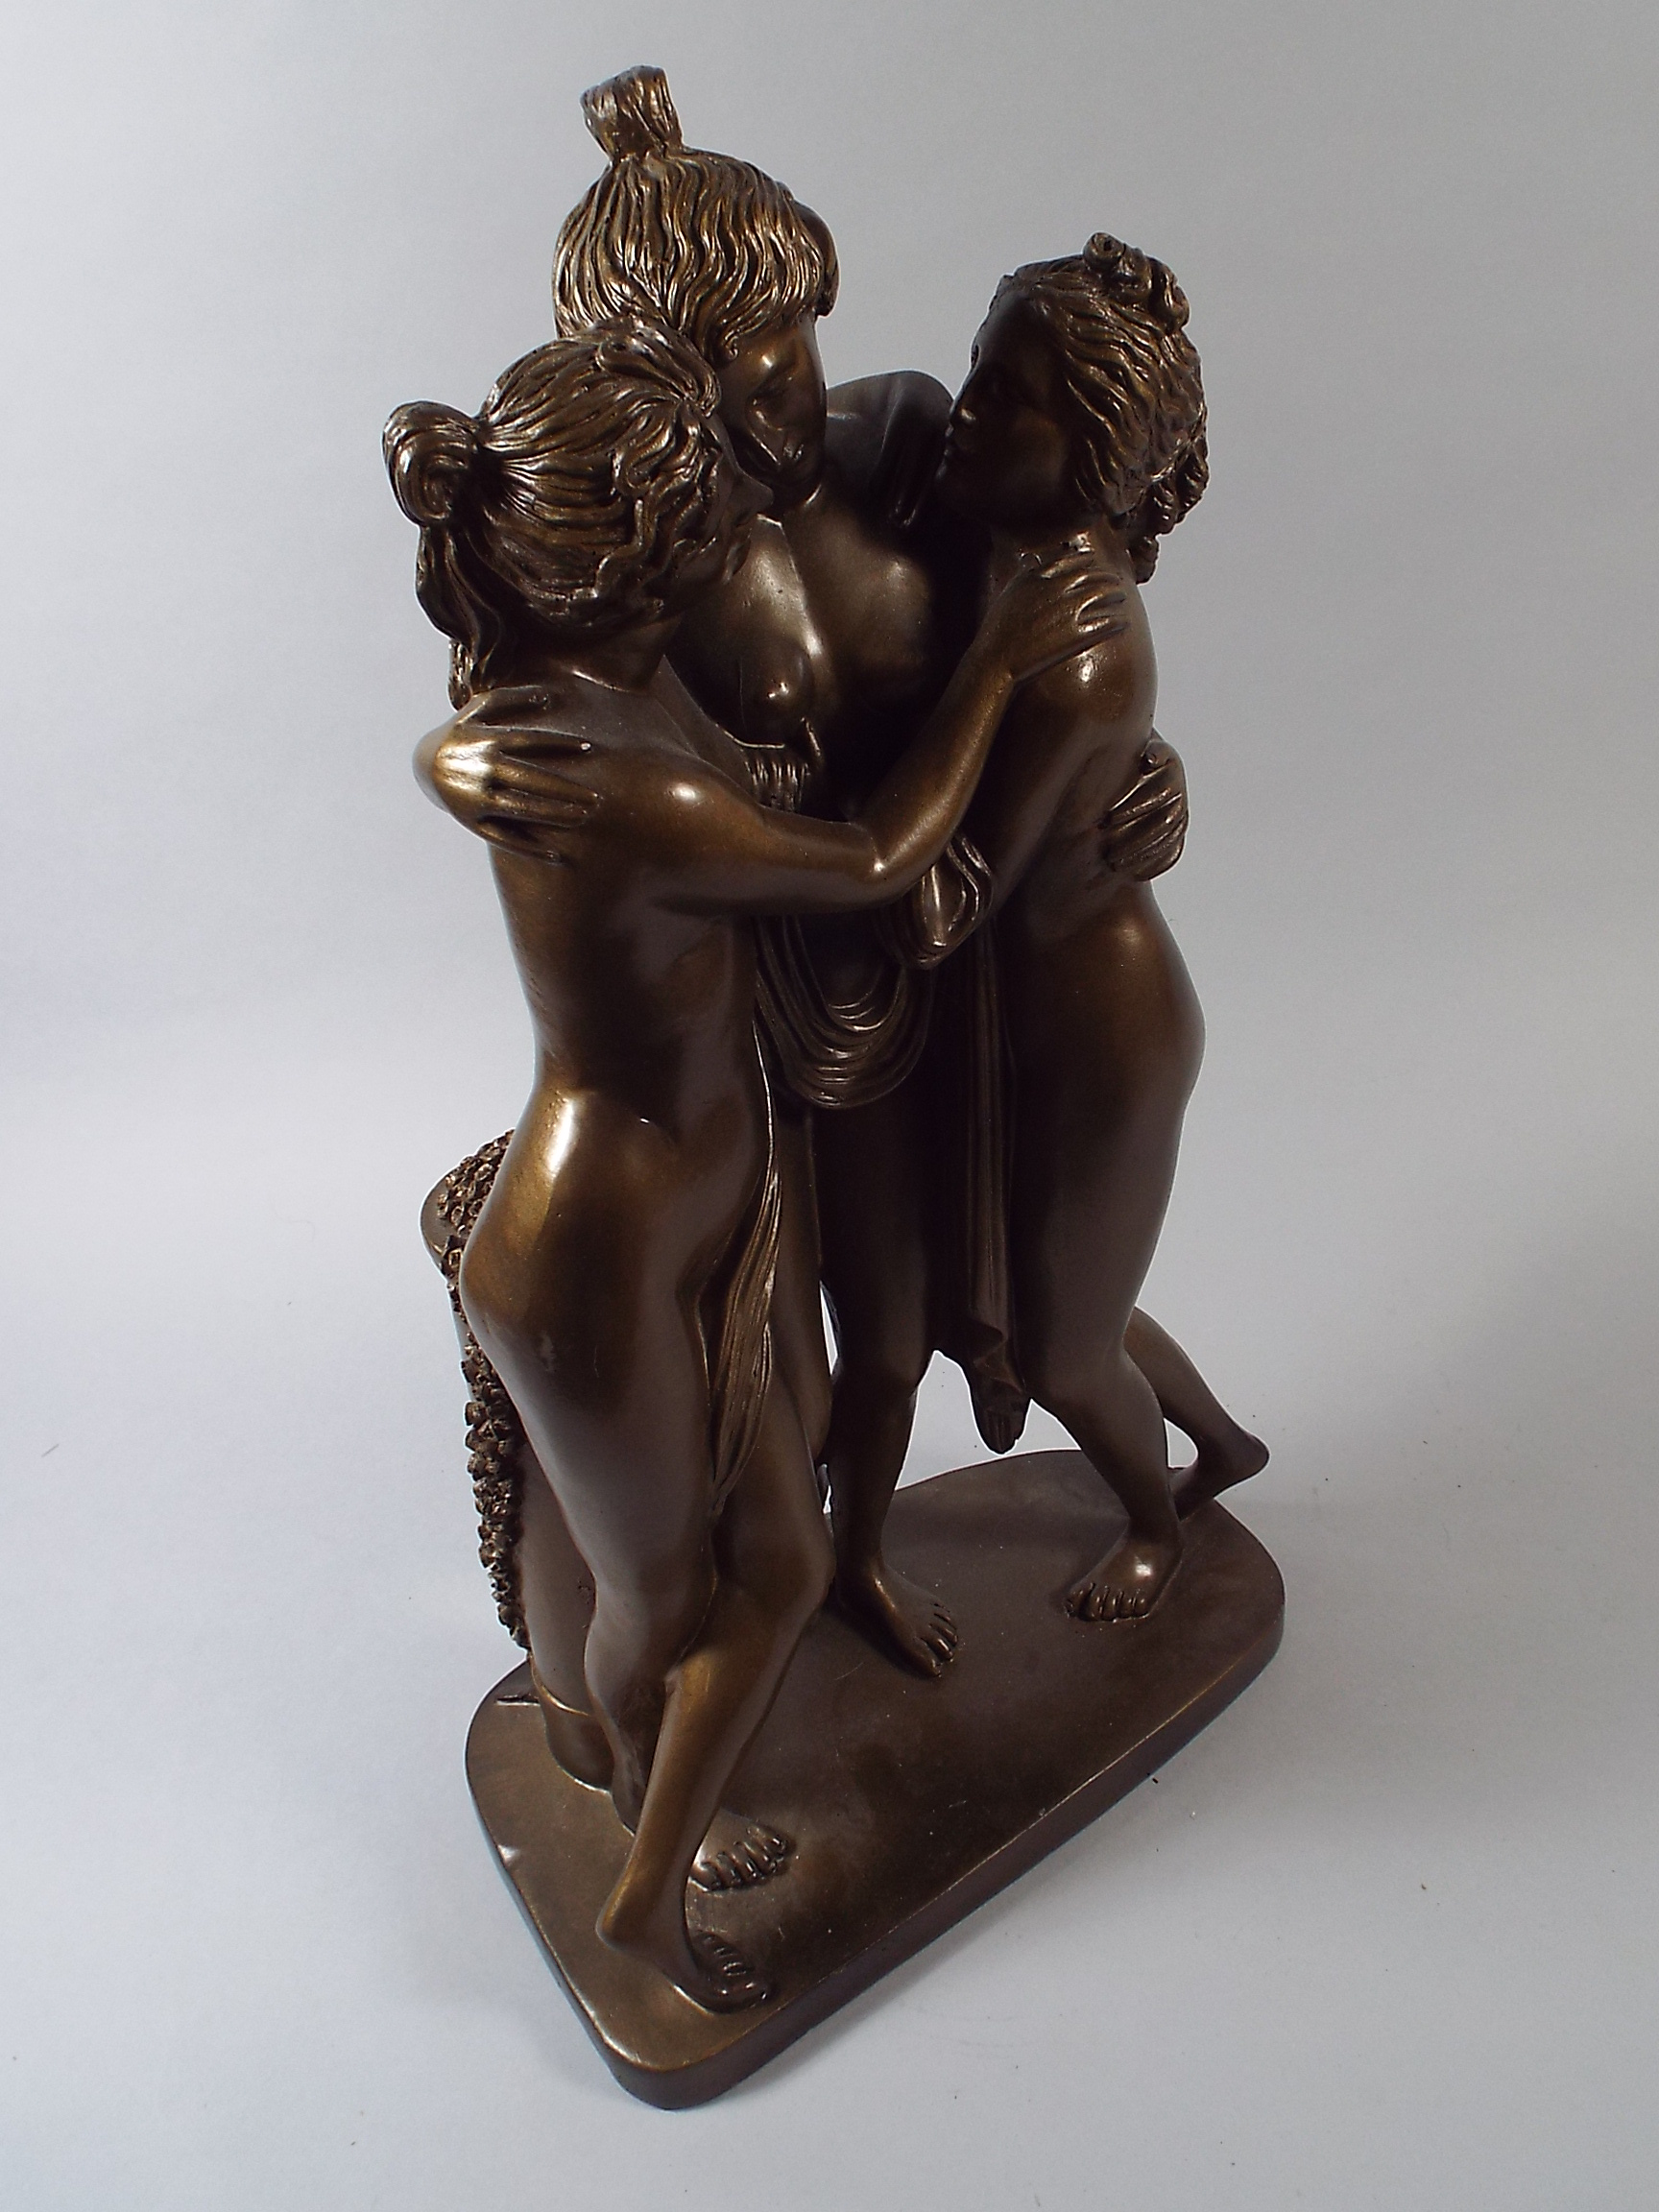 A Cast Resin Bronze Effect Figure of The Three Graces.